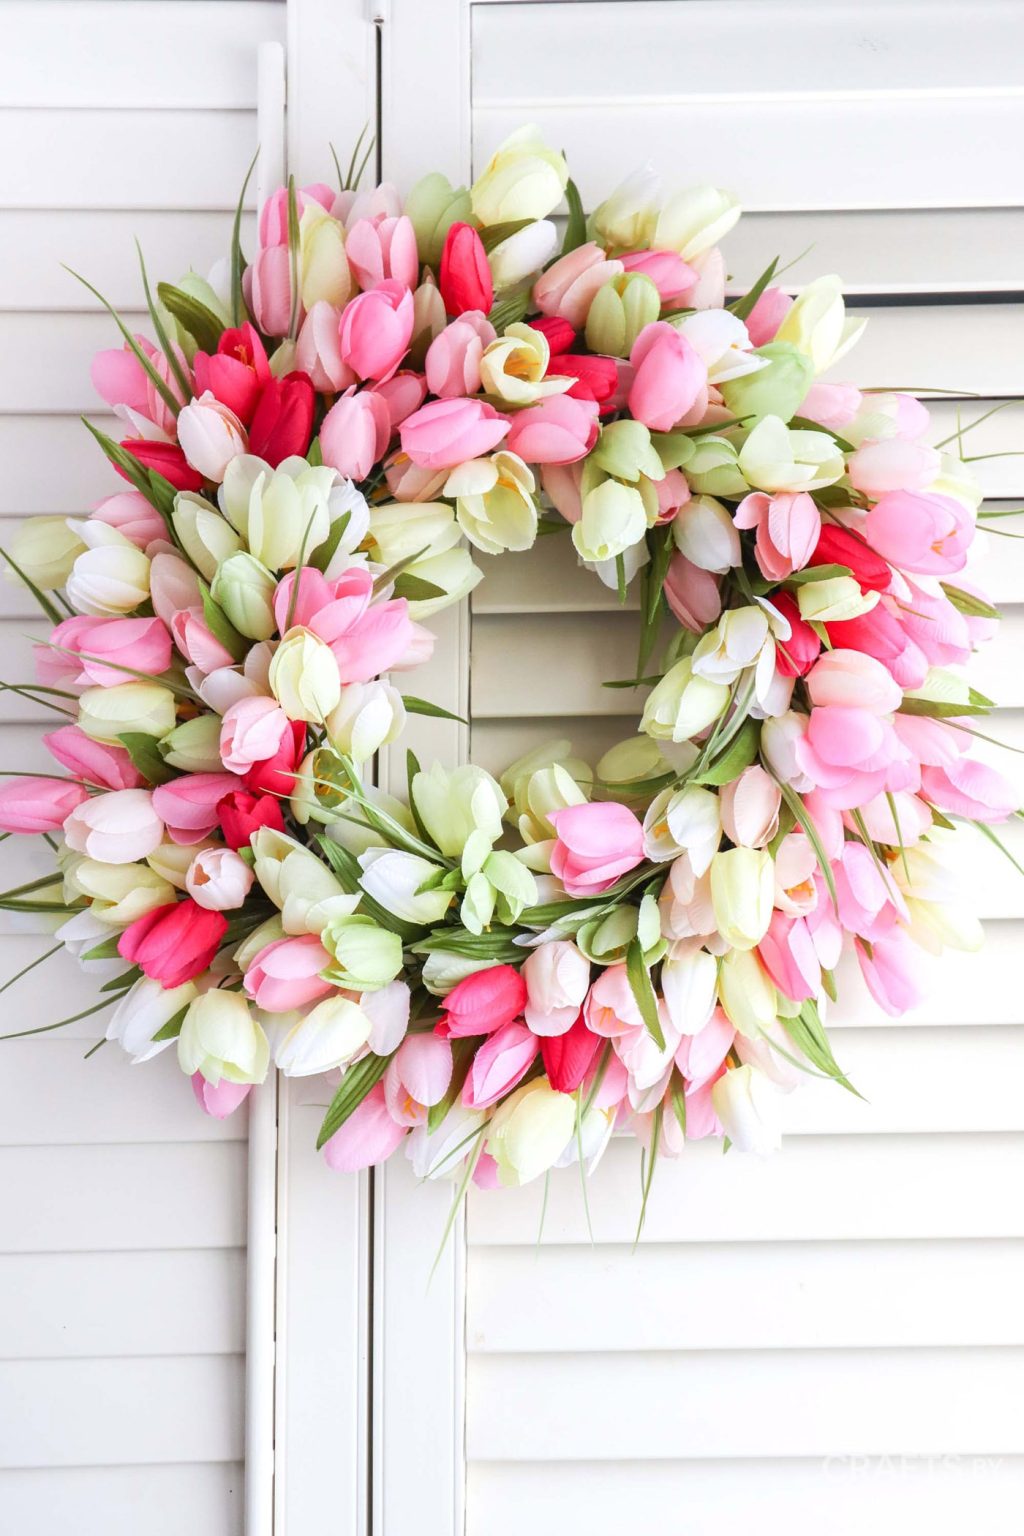 A wreath made from tulips